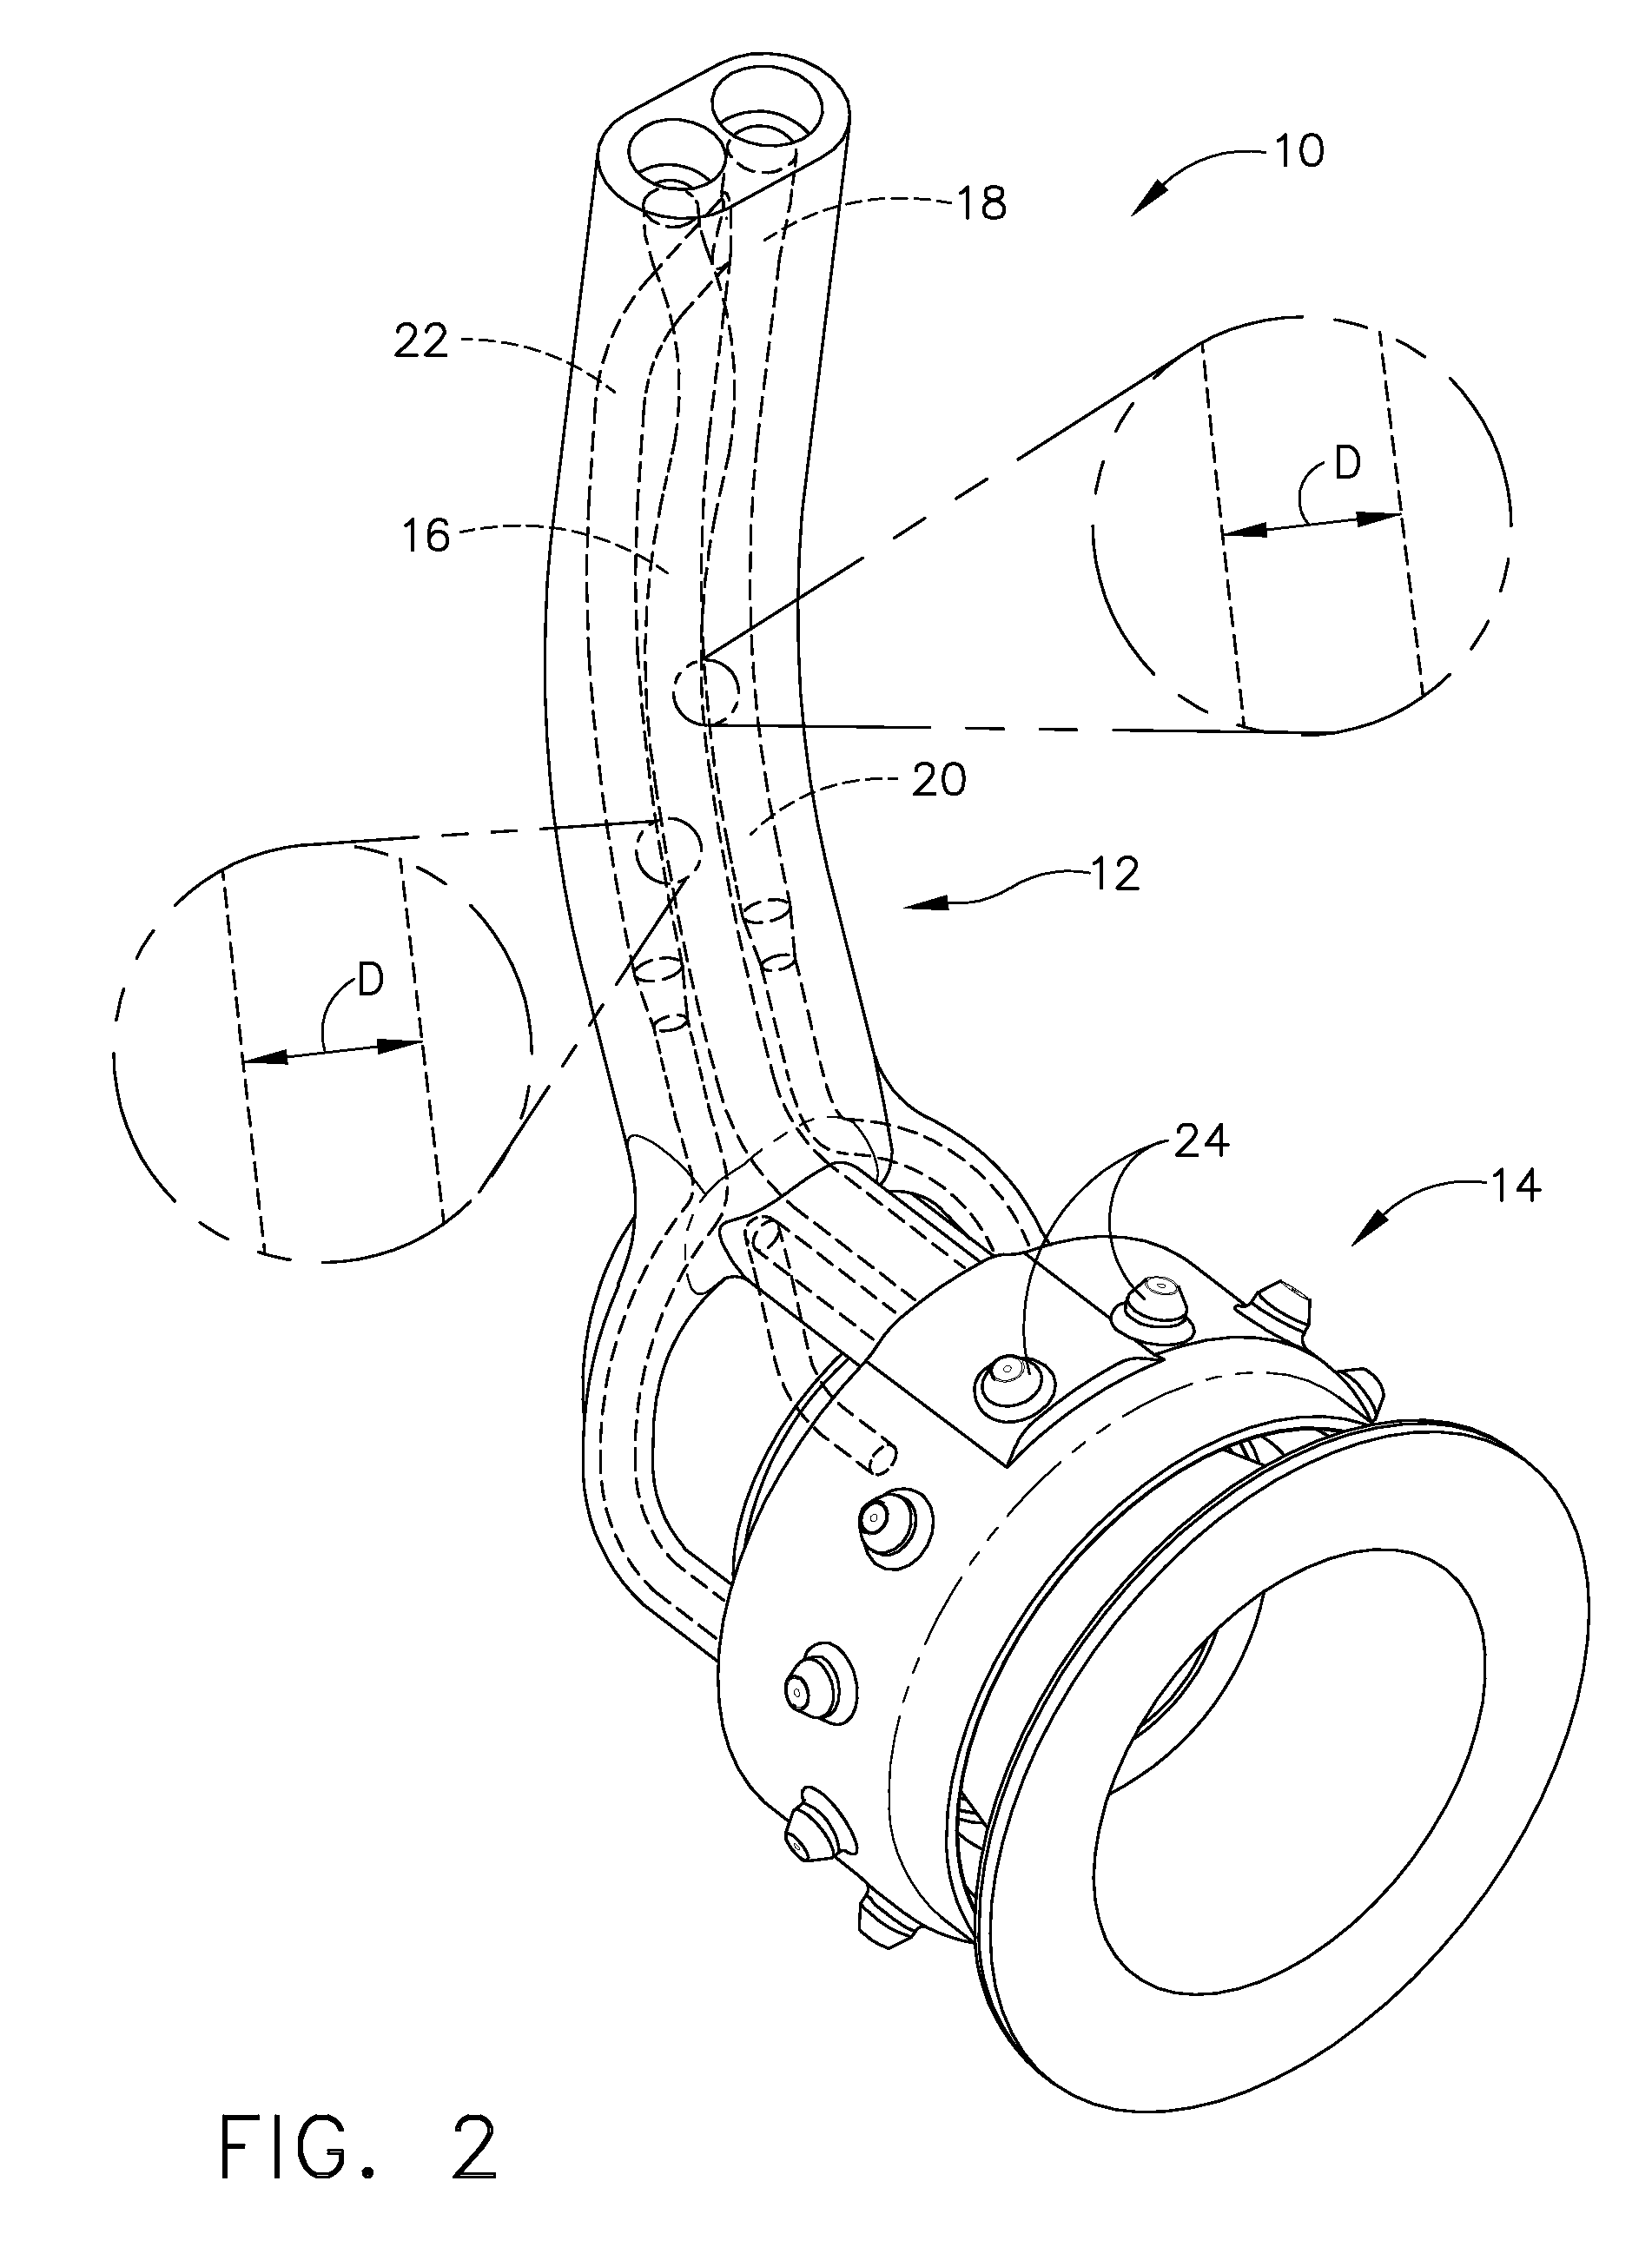 Components capable of transporting liquids manufactured using injection molding